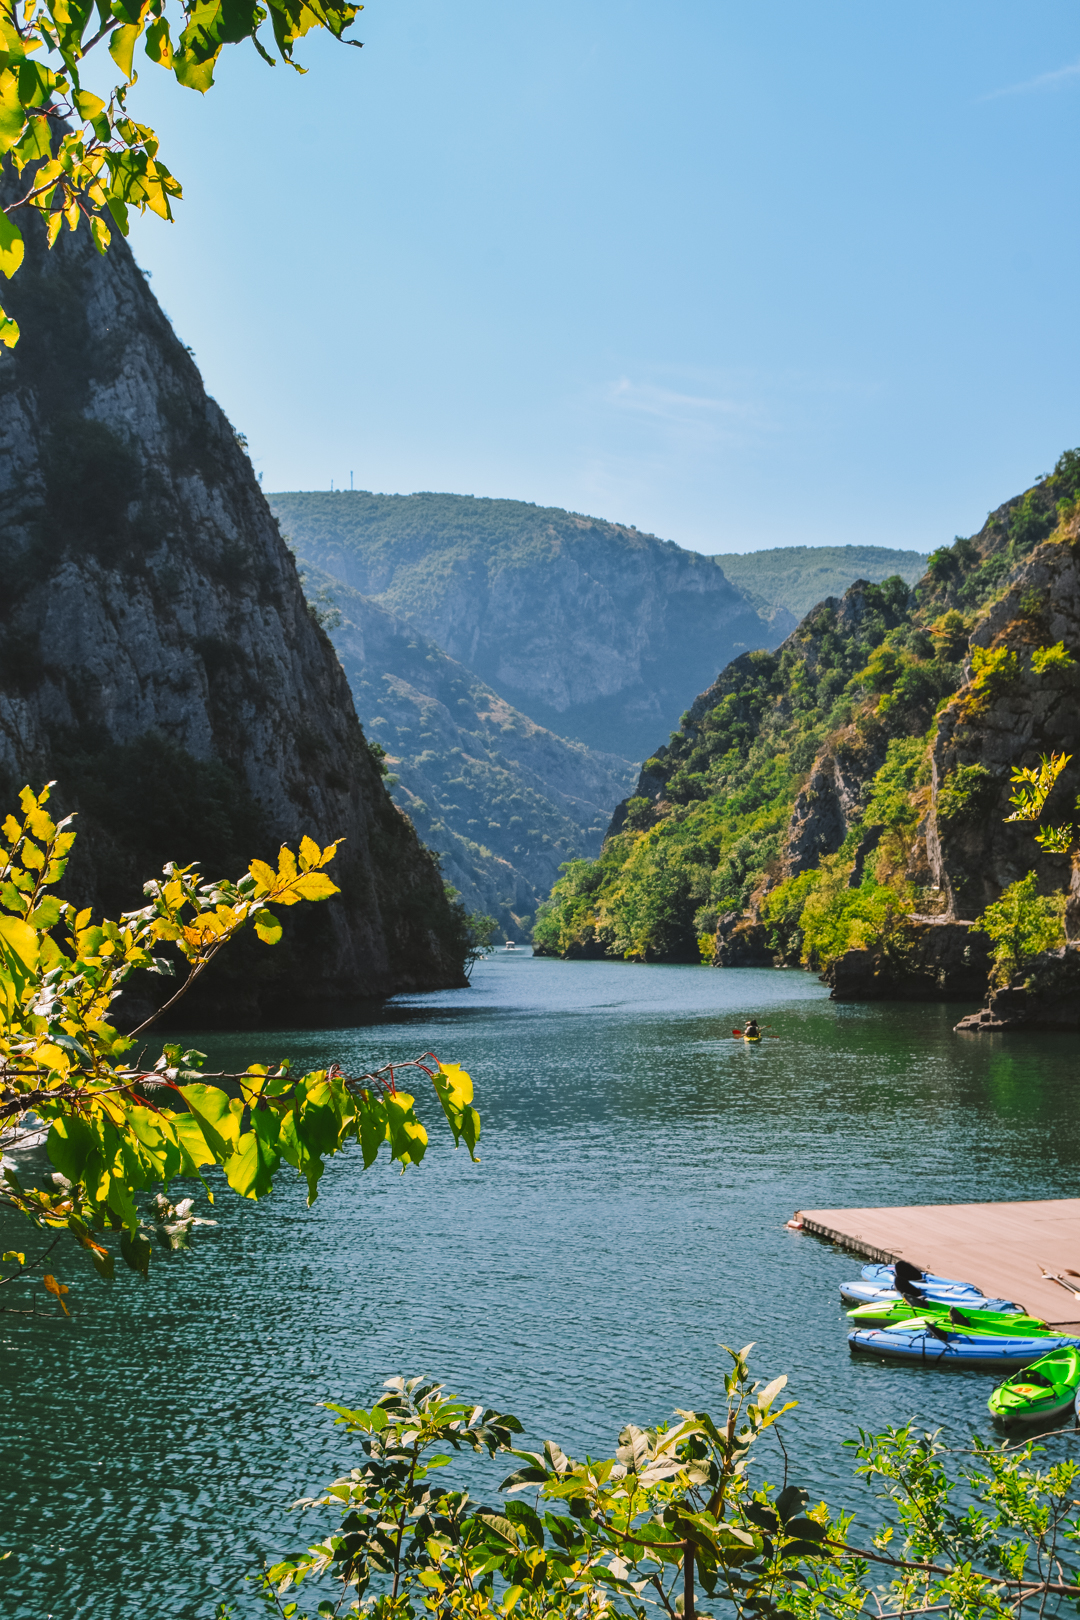 Go on a day trip to Matka Canyon